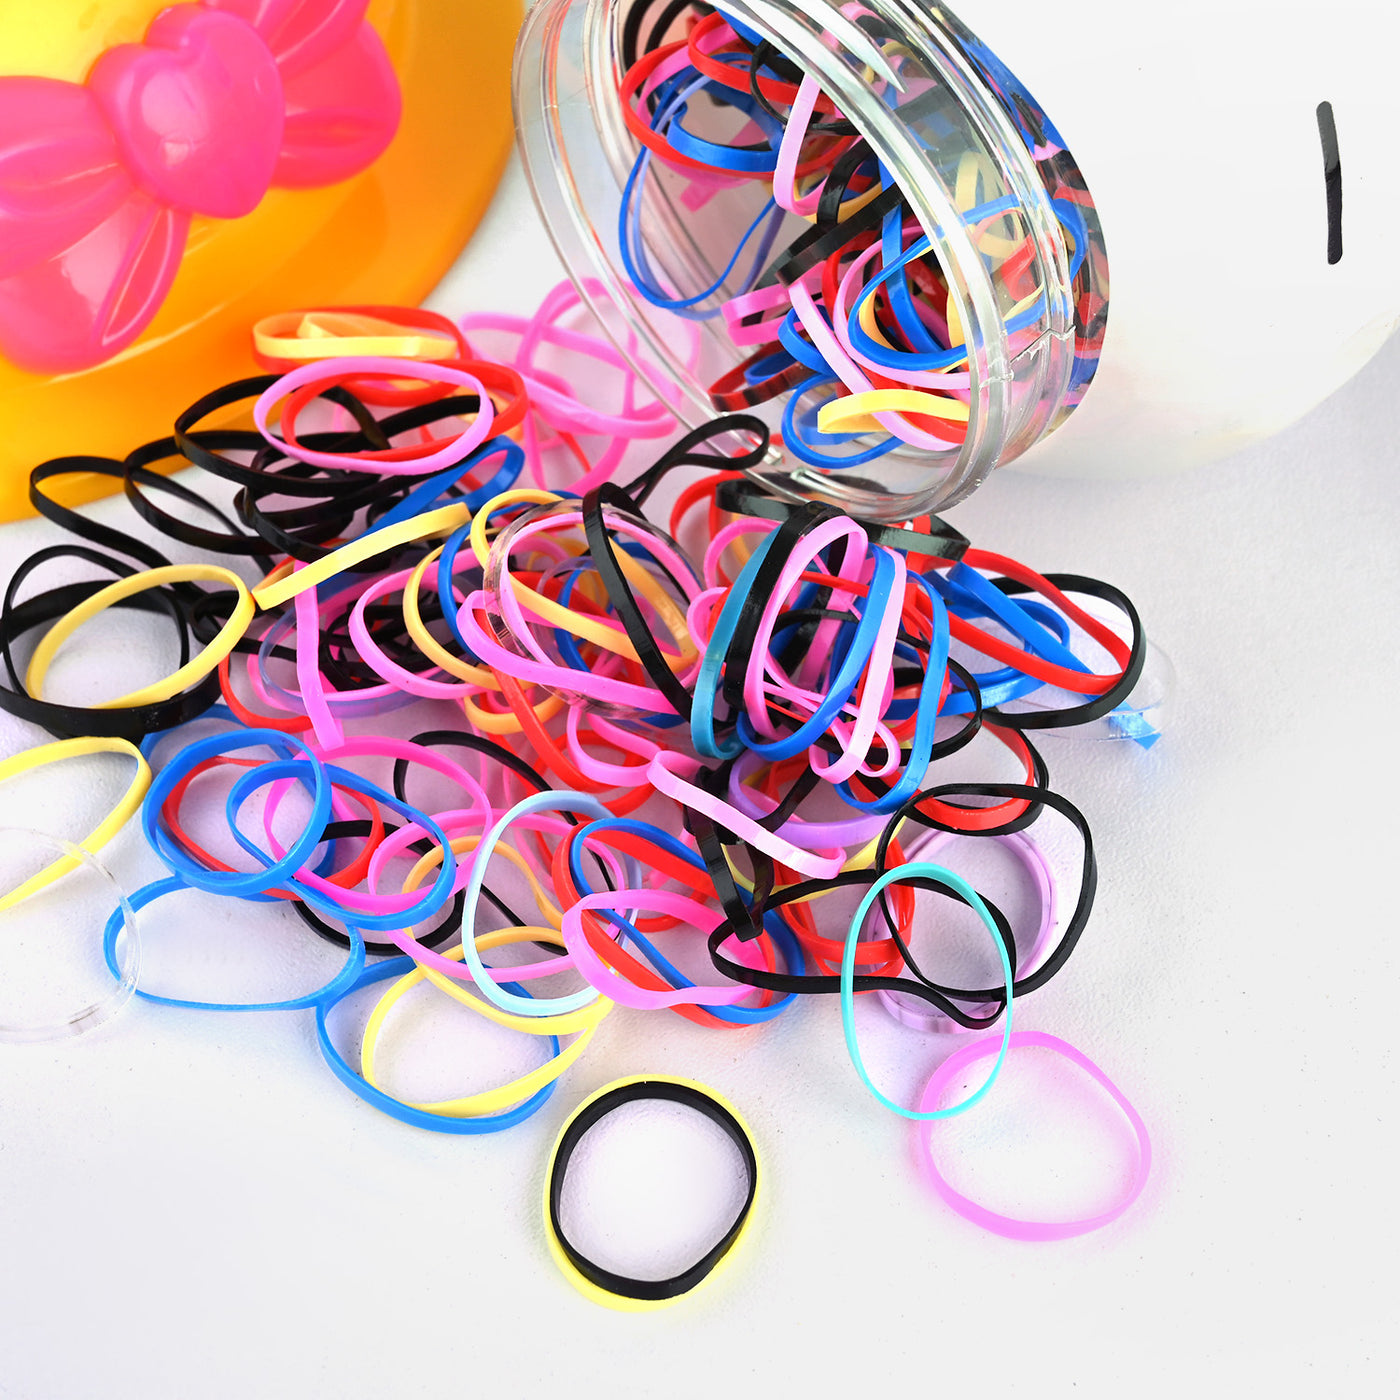 Plastic Rubber Bands With Box